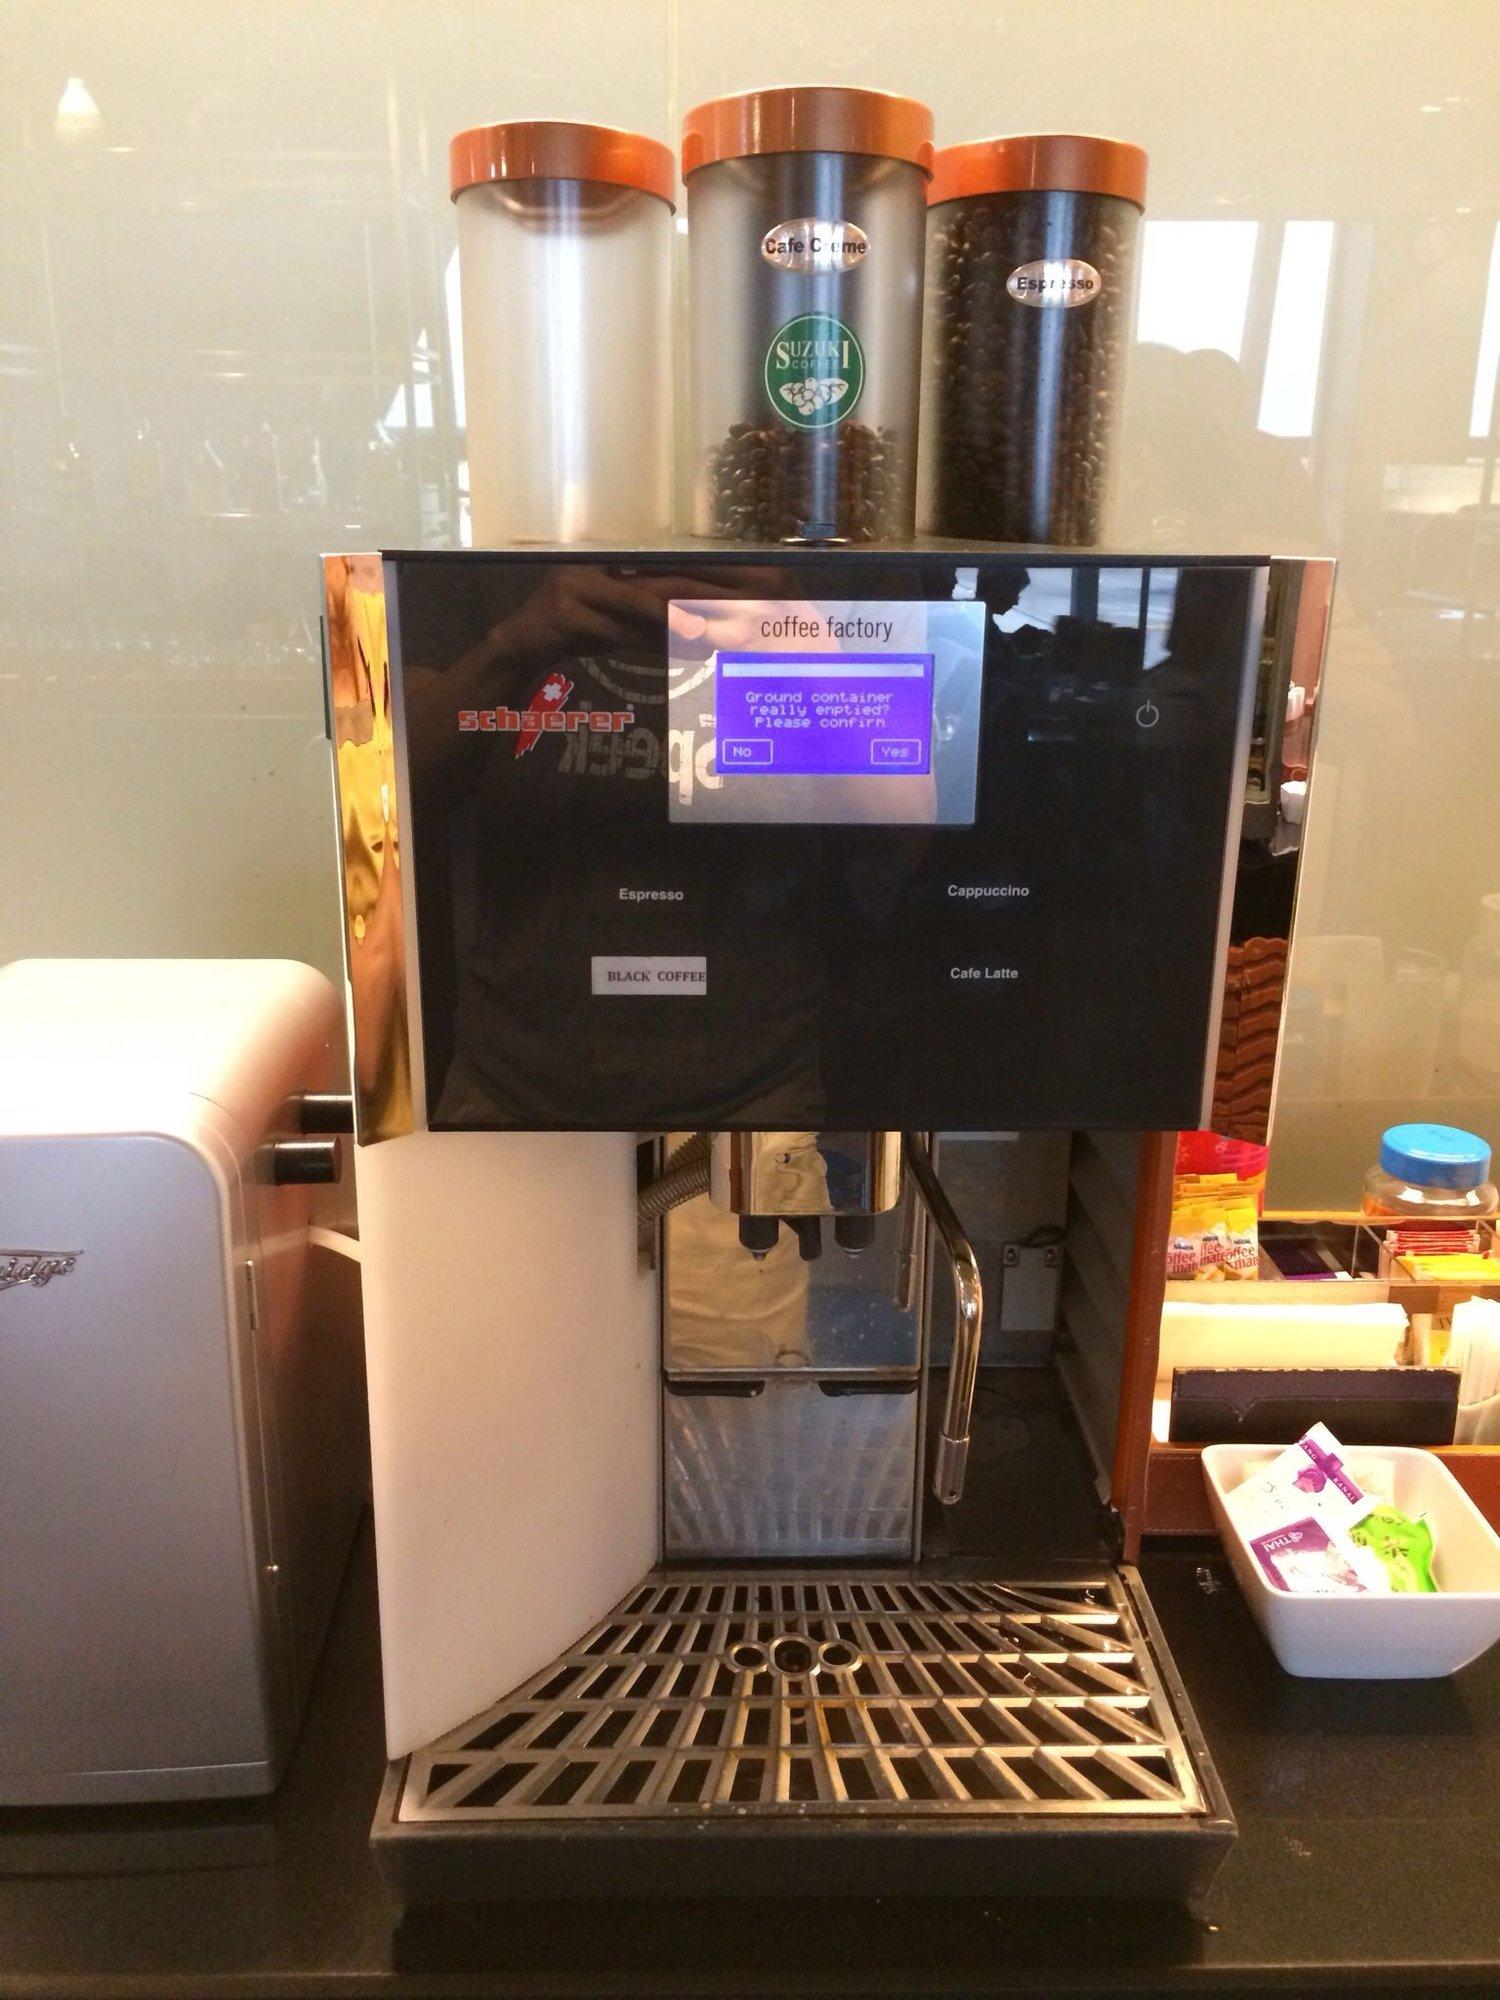 Thai Airways Royal Orchid Lounge image 10 of 15